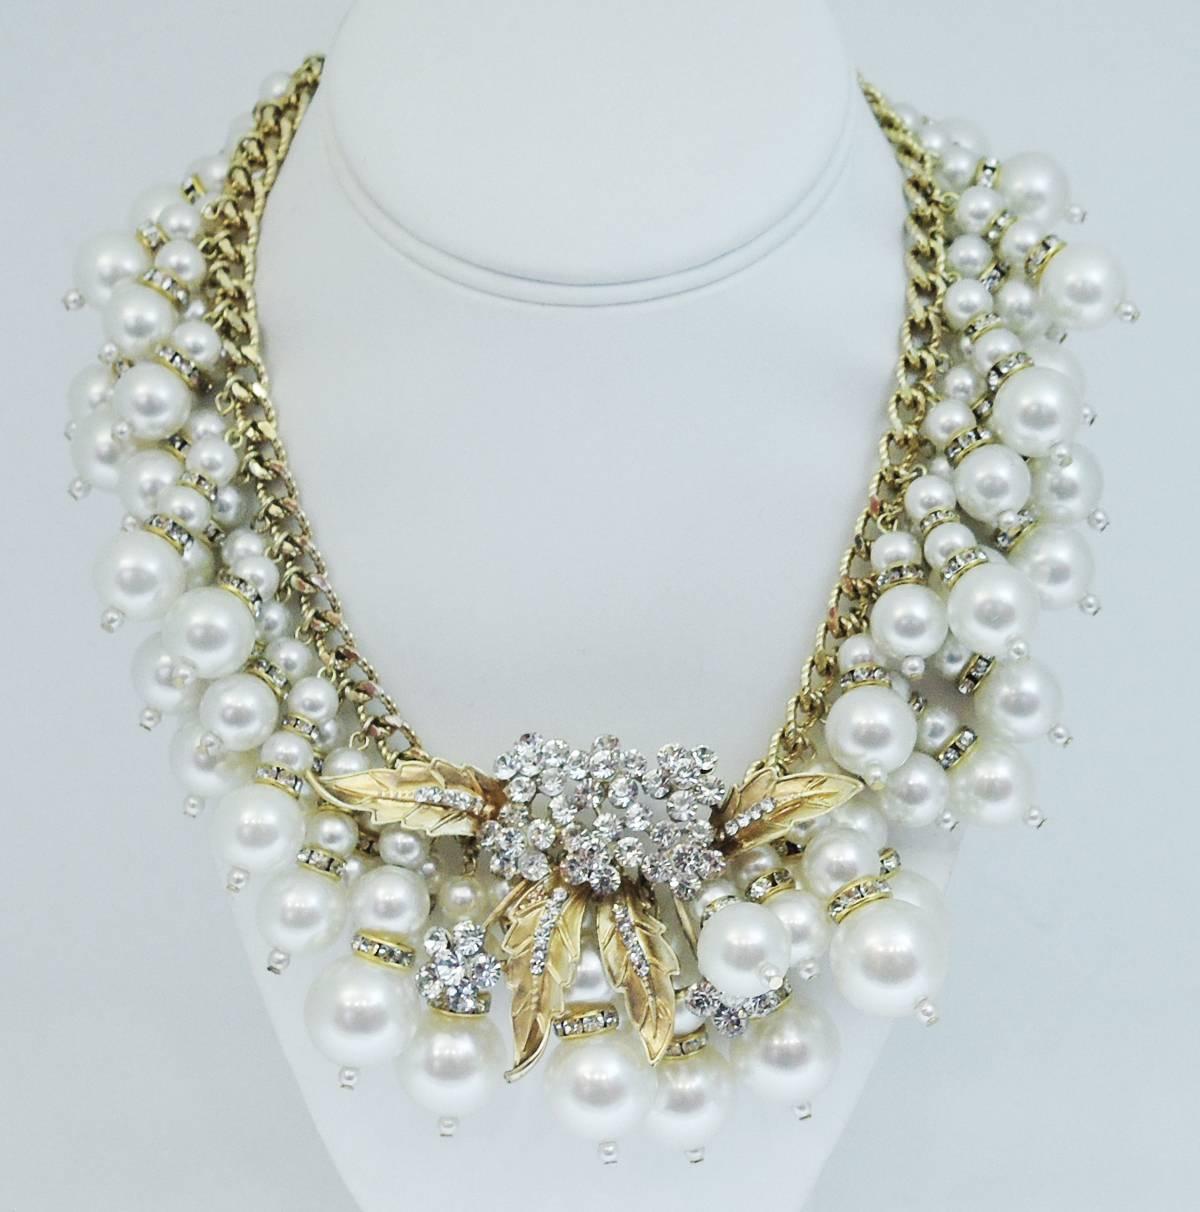 This one-of-a-kind Anka necklace features a massive amount of cascading faux pearls that dangle from a braided link necklace. The pearls have rhondelle spacers in between them and the detailed centerpiece has a floral leaf design with large round